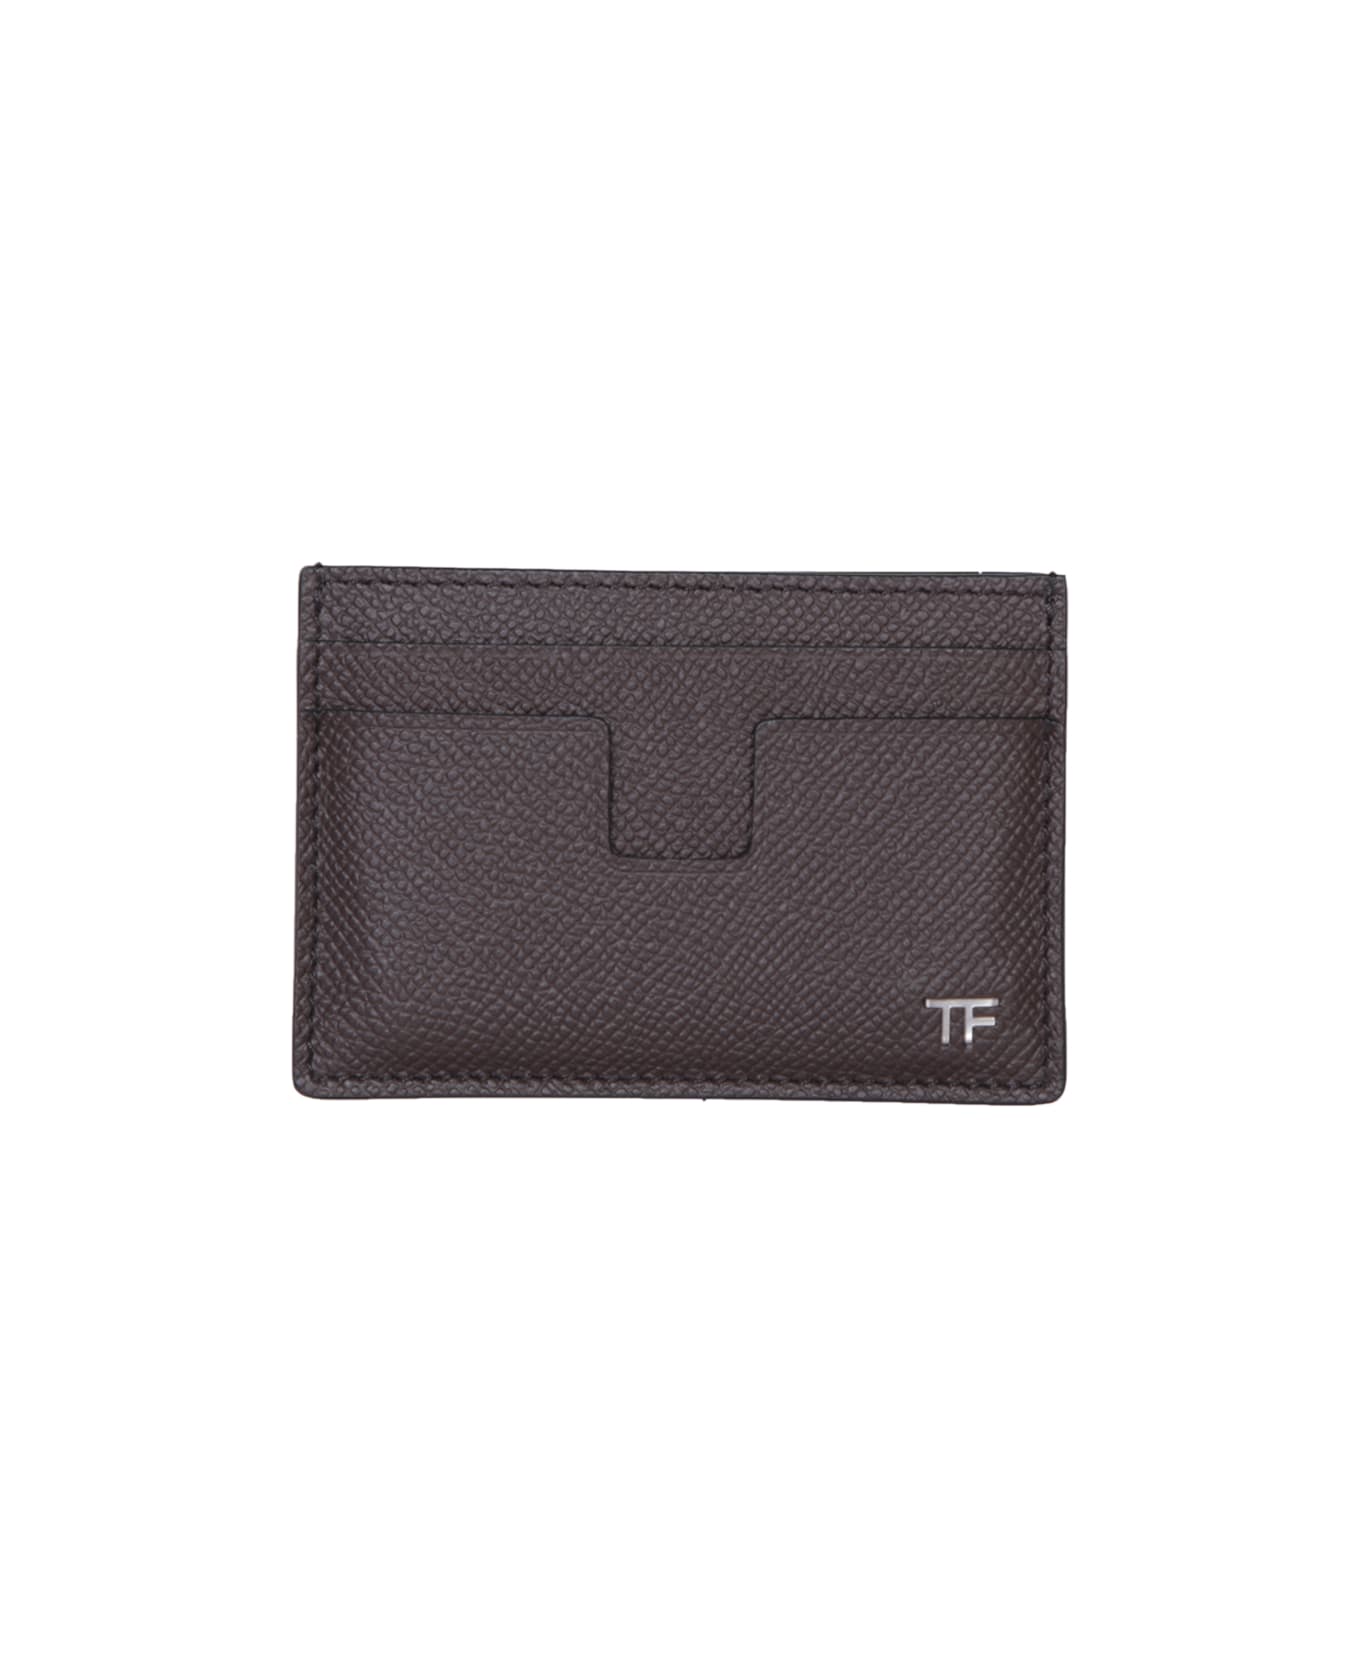 Tom Ford Logo Plaque Classic Credit Card Holder - Chocolate